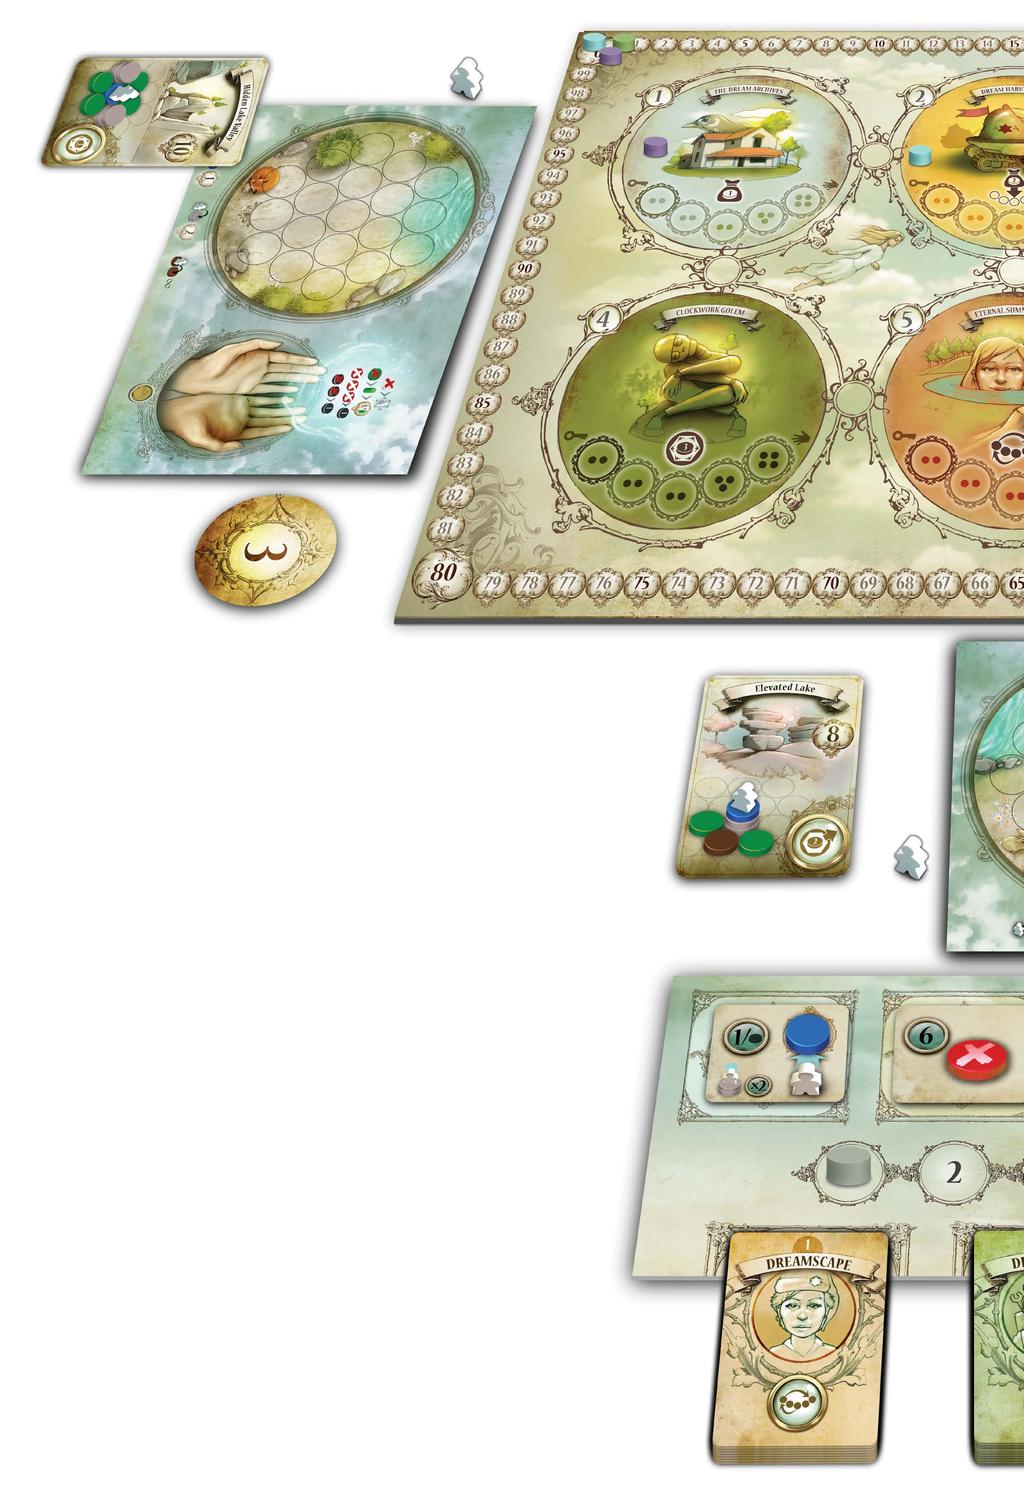 SETTING UP THE GAME In order to set up the game, follow the listed steps in order, going from 1 to 9 around the central setup illustration: 1/ Dreamworld board Place it in the center of your playing